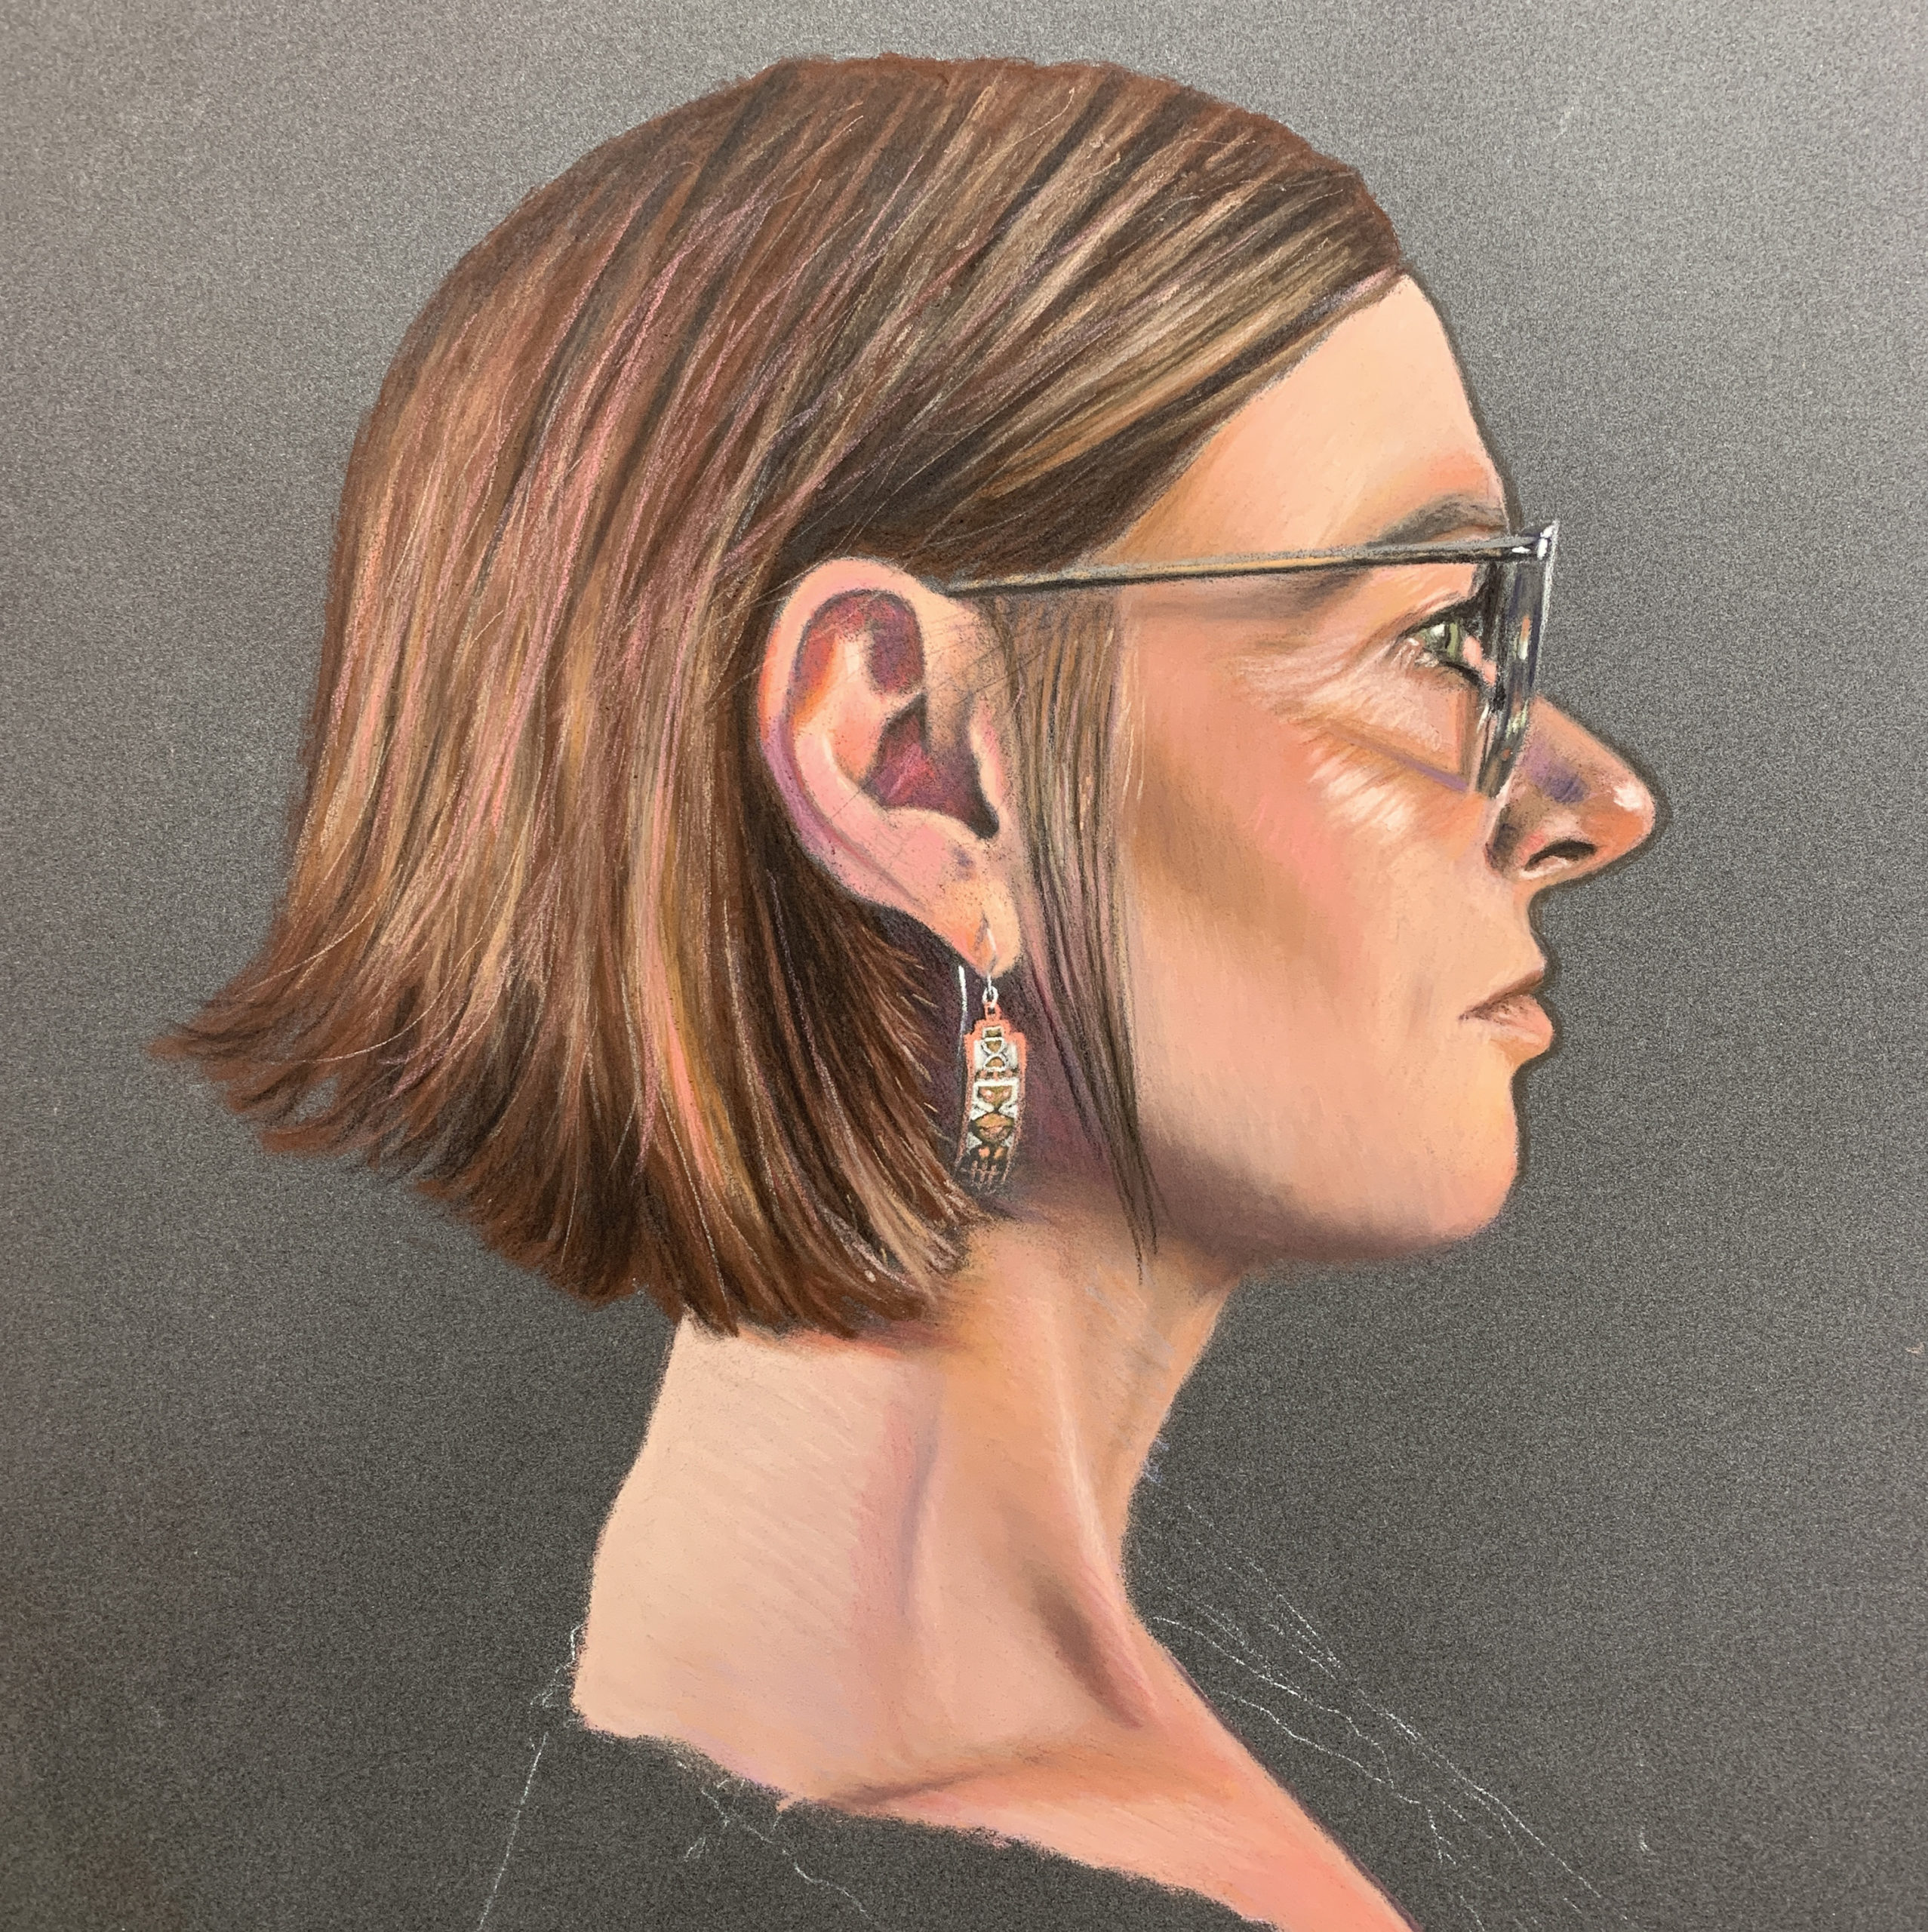 How to paint hair: Michele Ashby, "The best is yet to come," pastel, 33 x 28 cm. Before the background and clothing added.